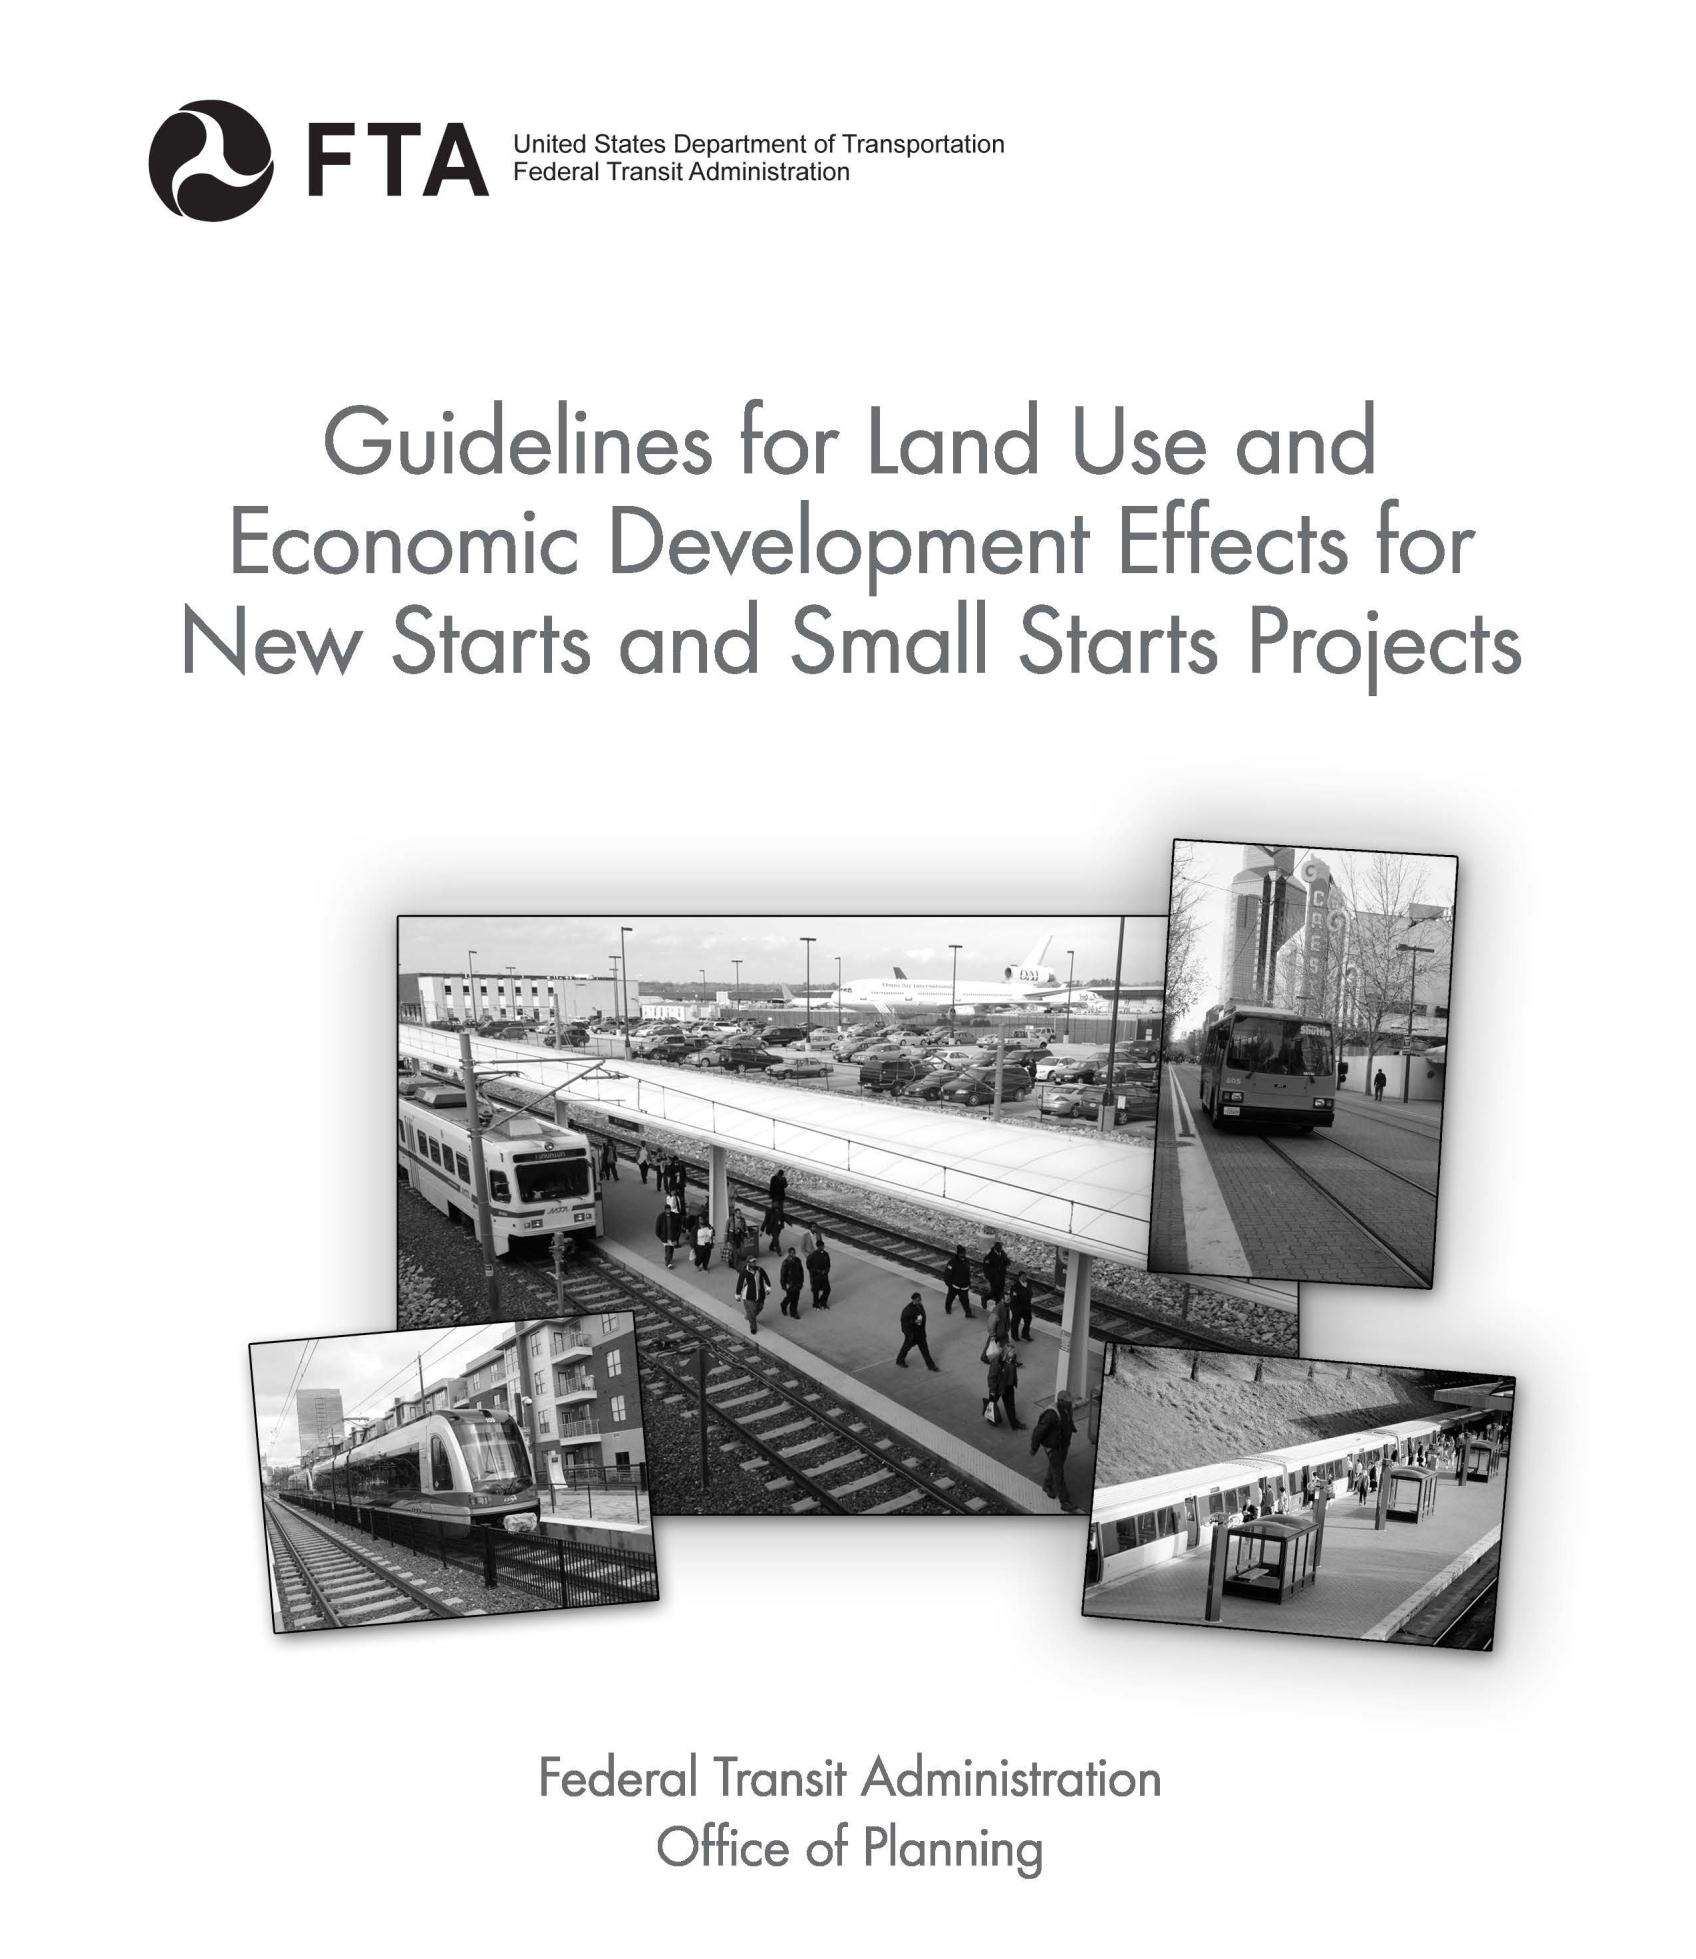 FTA Guidelines for Land Use & Economic Development Effects